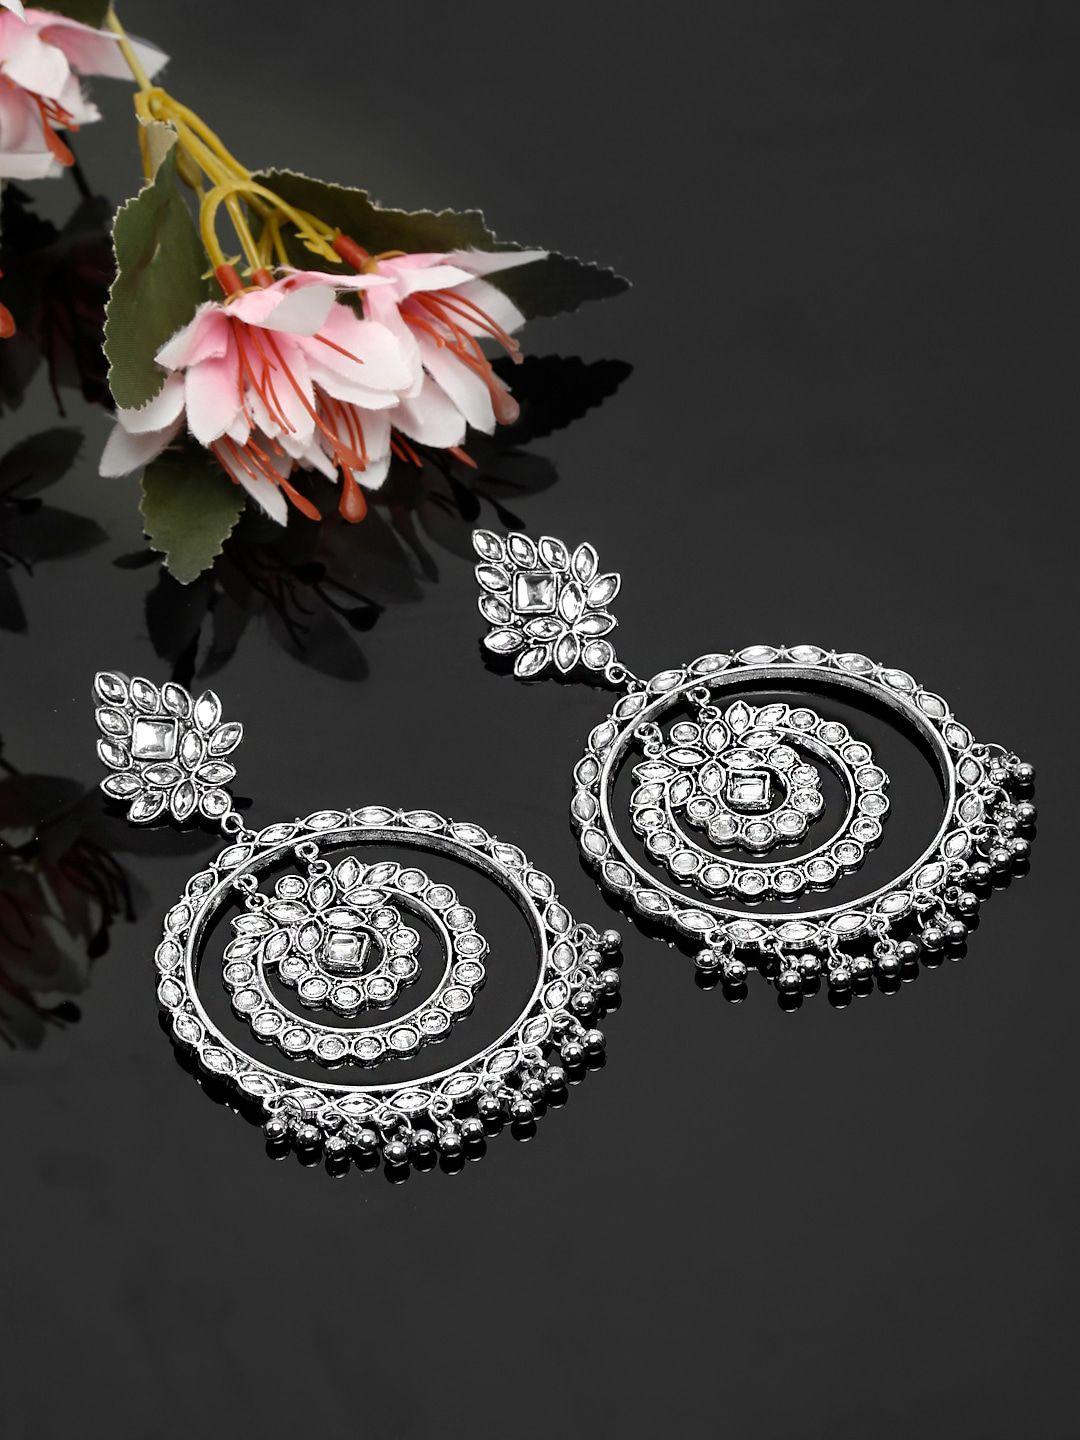 yellow chimes oxidised silver-toned contemporary chandbali earrings